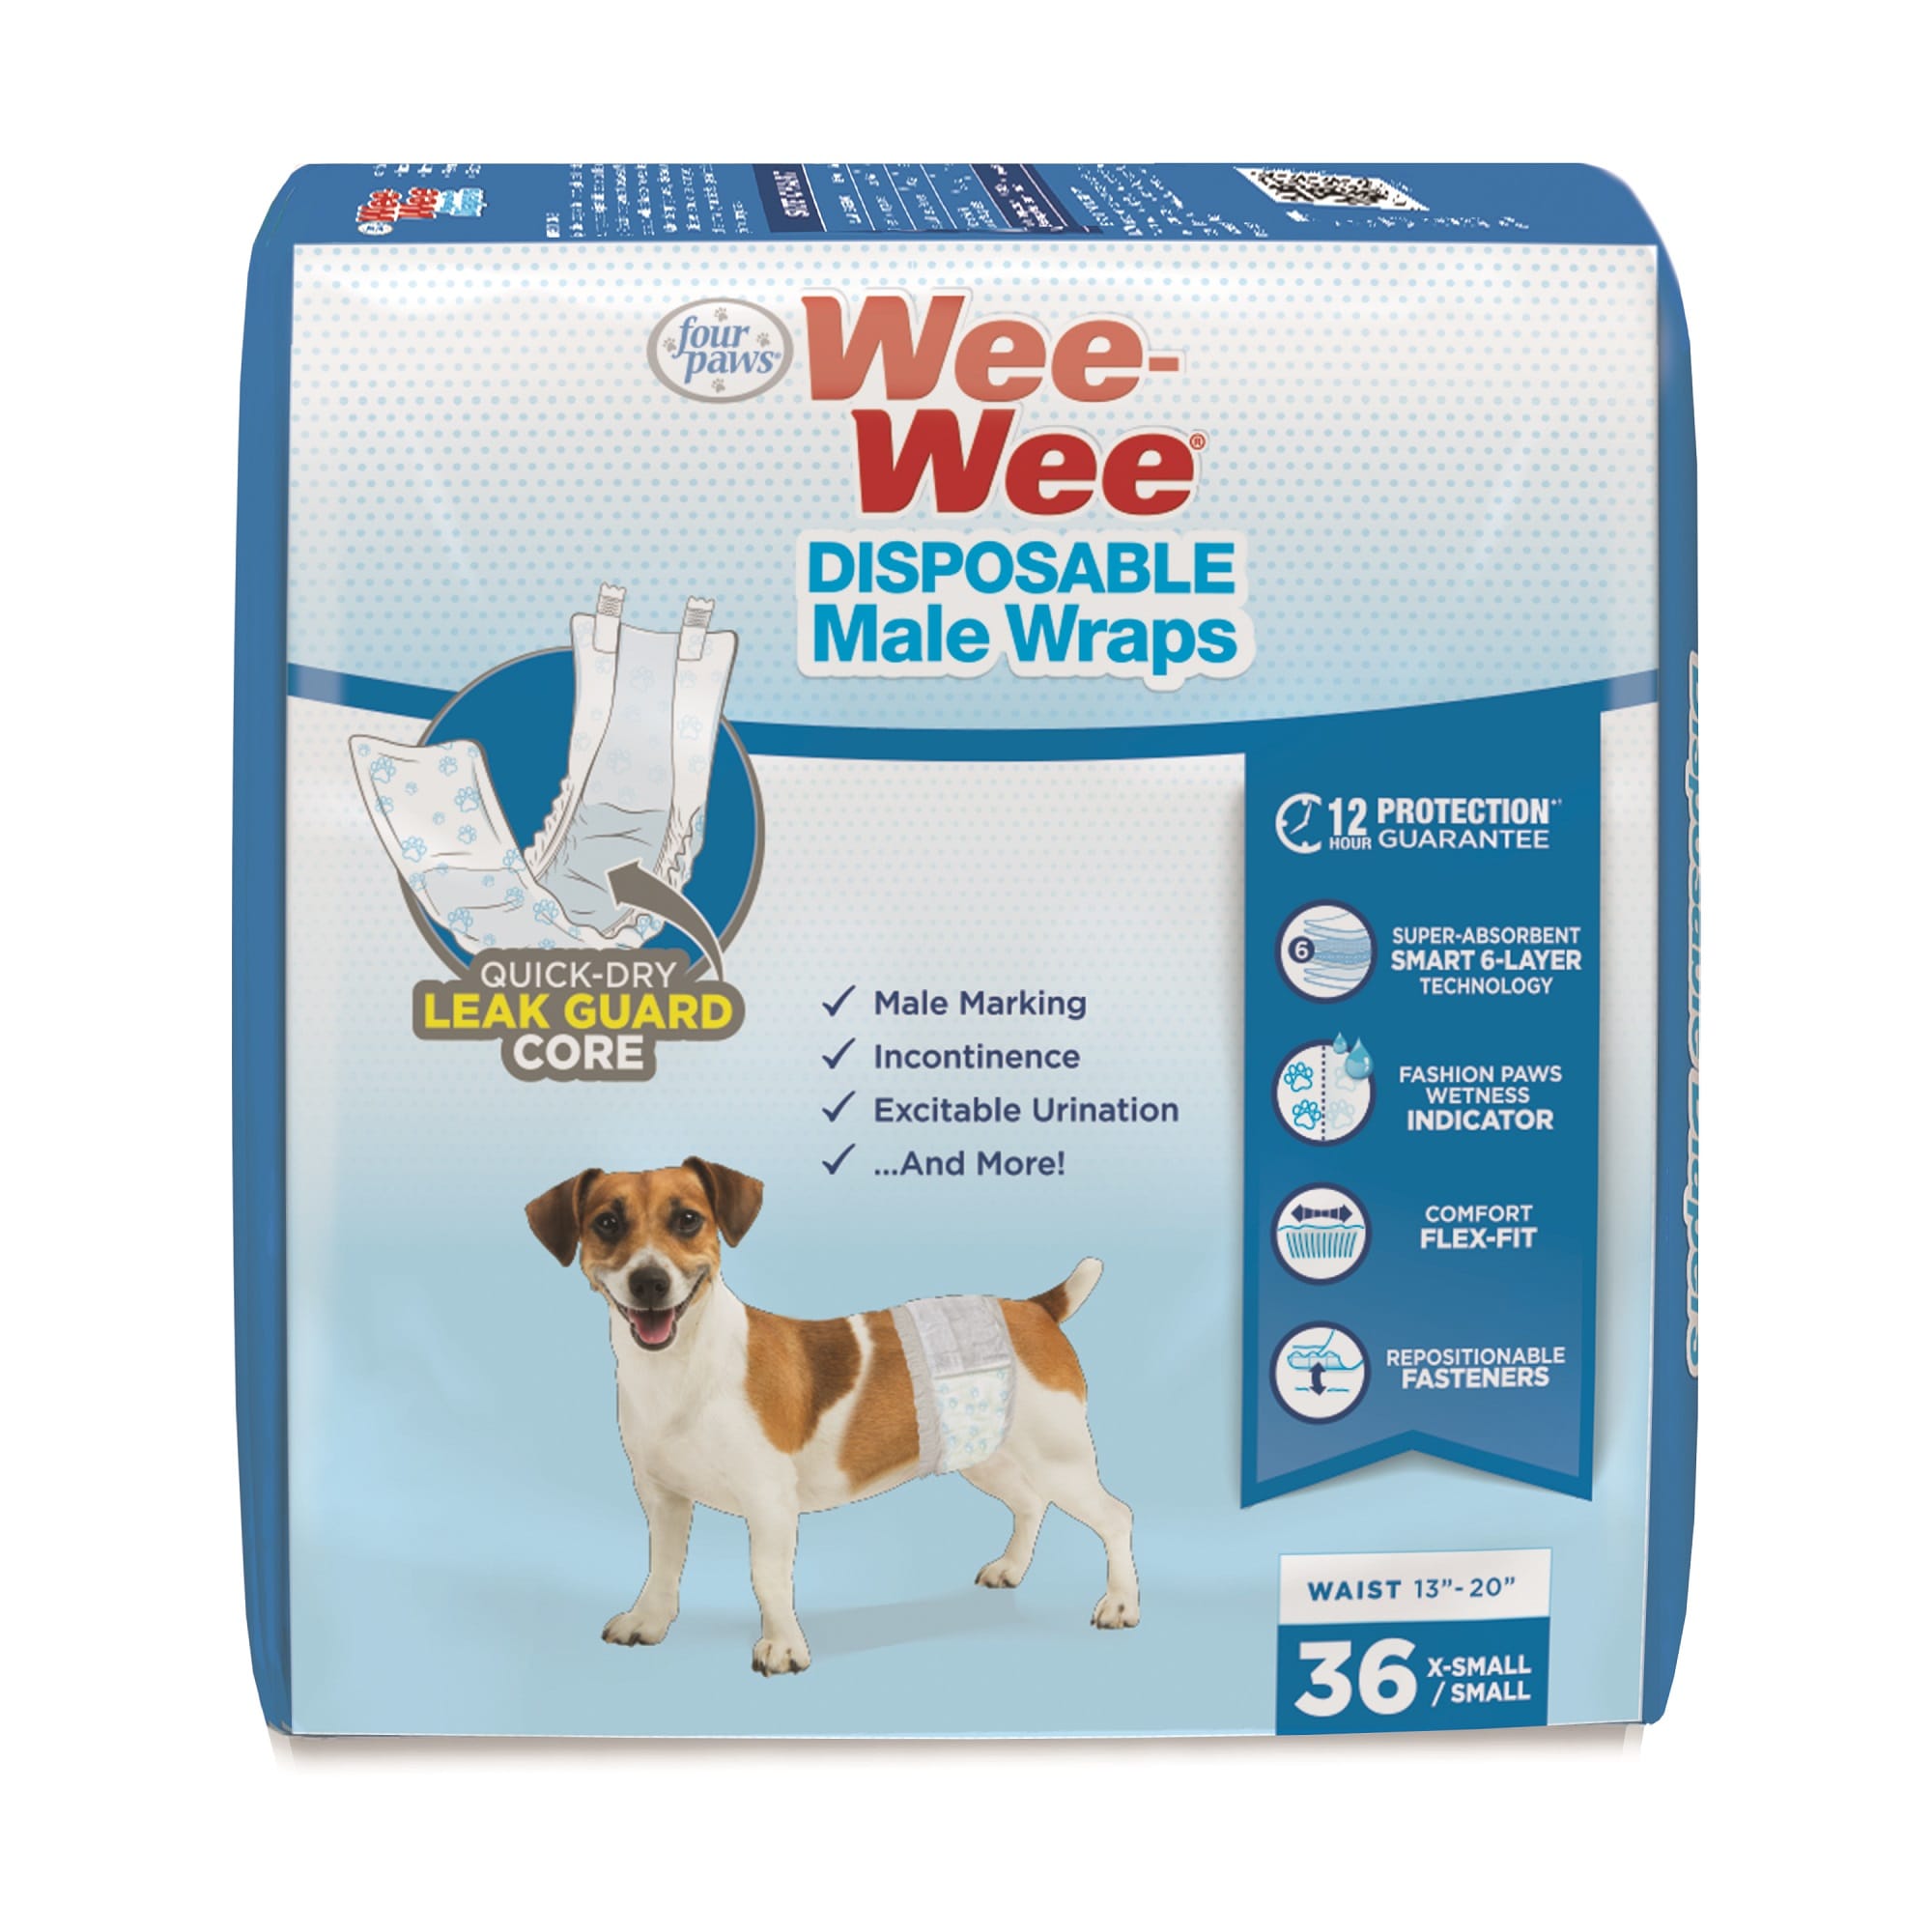 wee wee male dog wraps